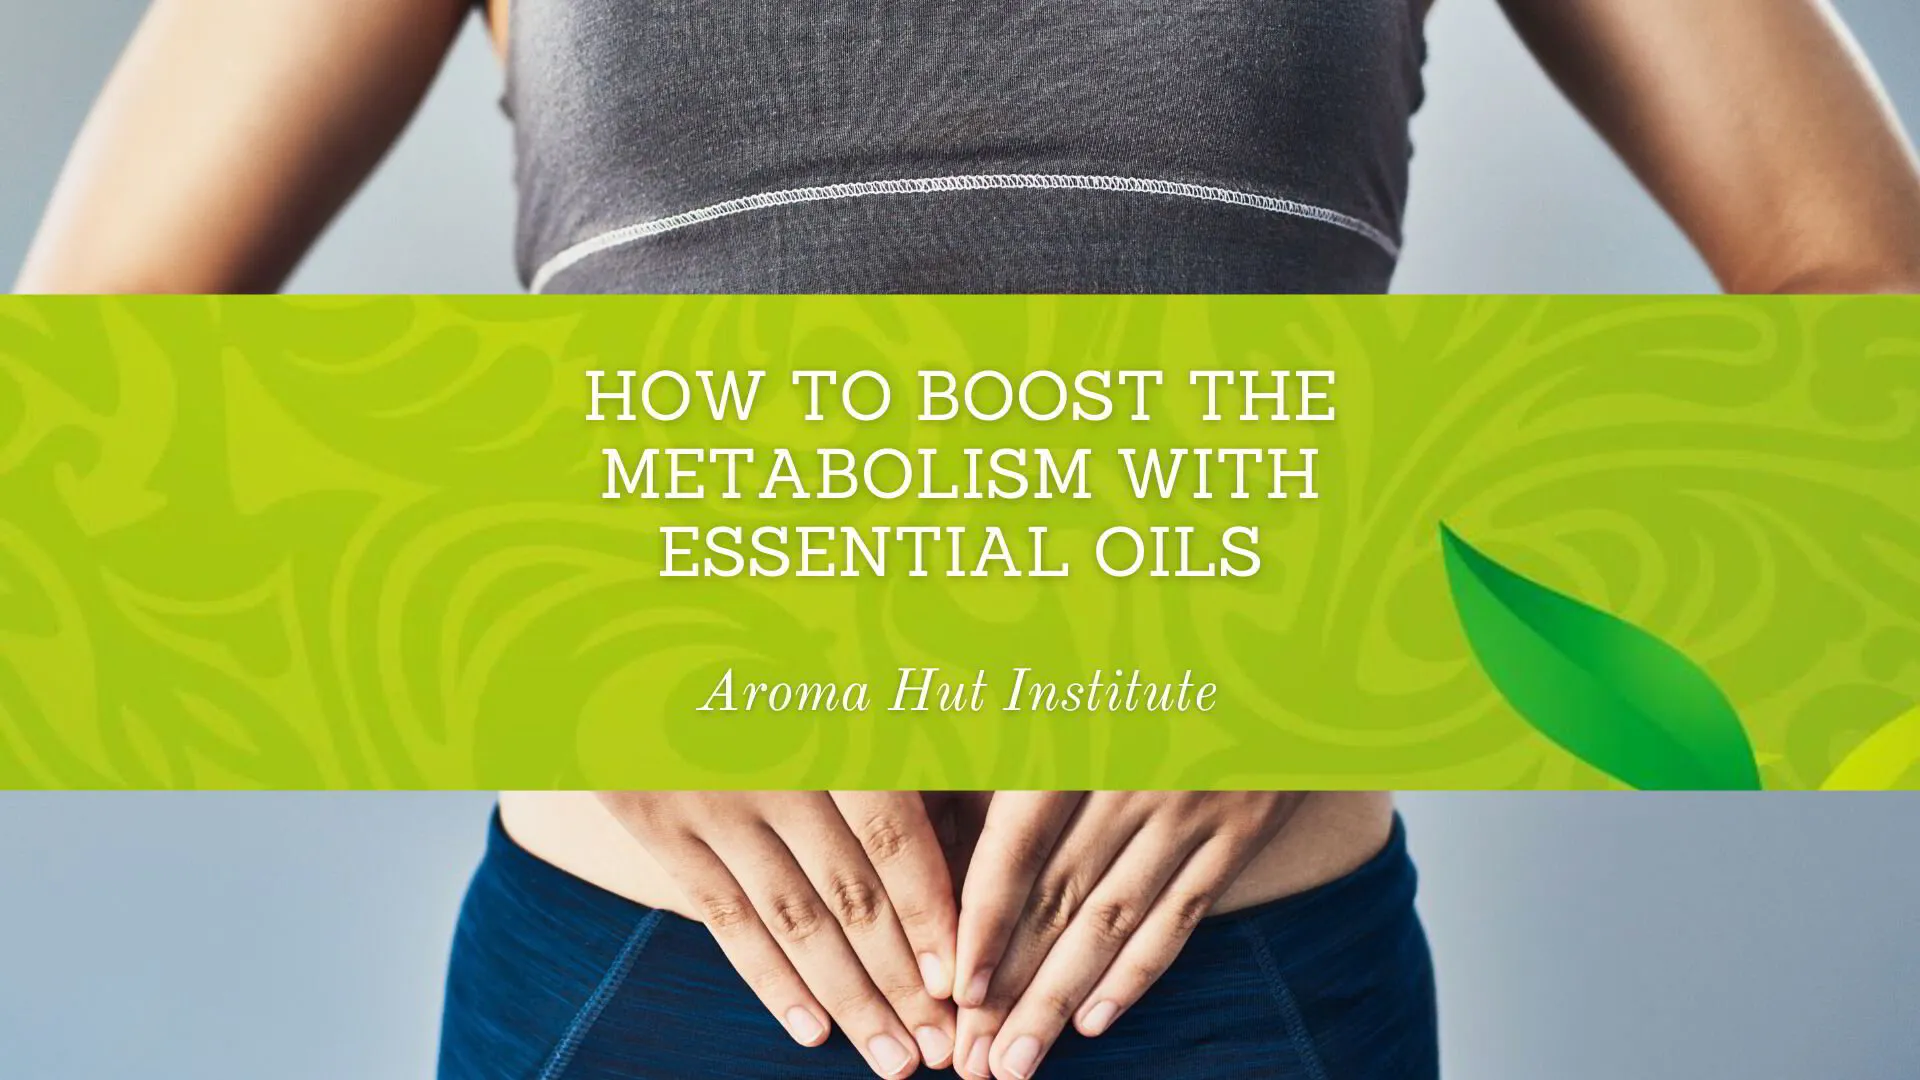 How to Boost the Metabolism with Essential Oils